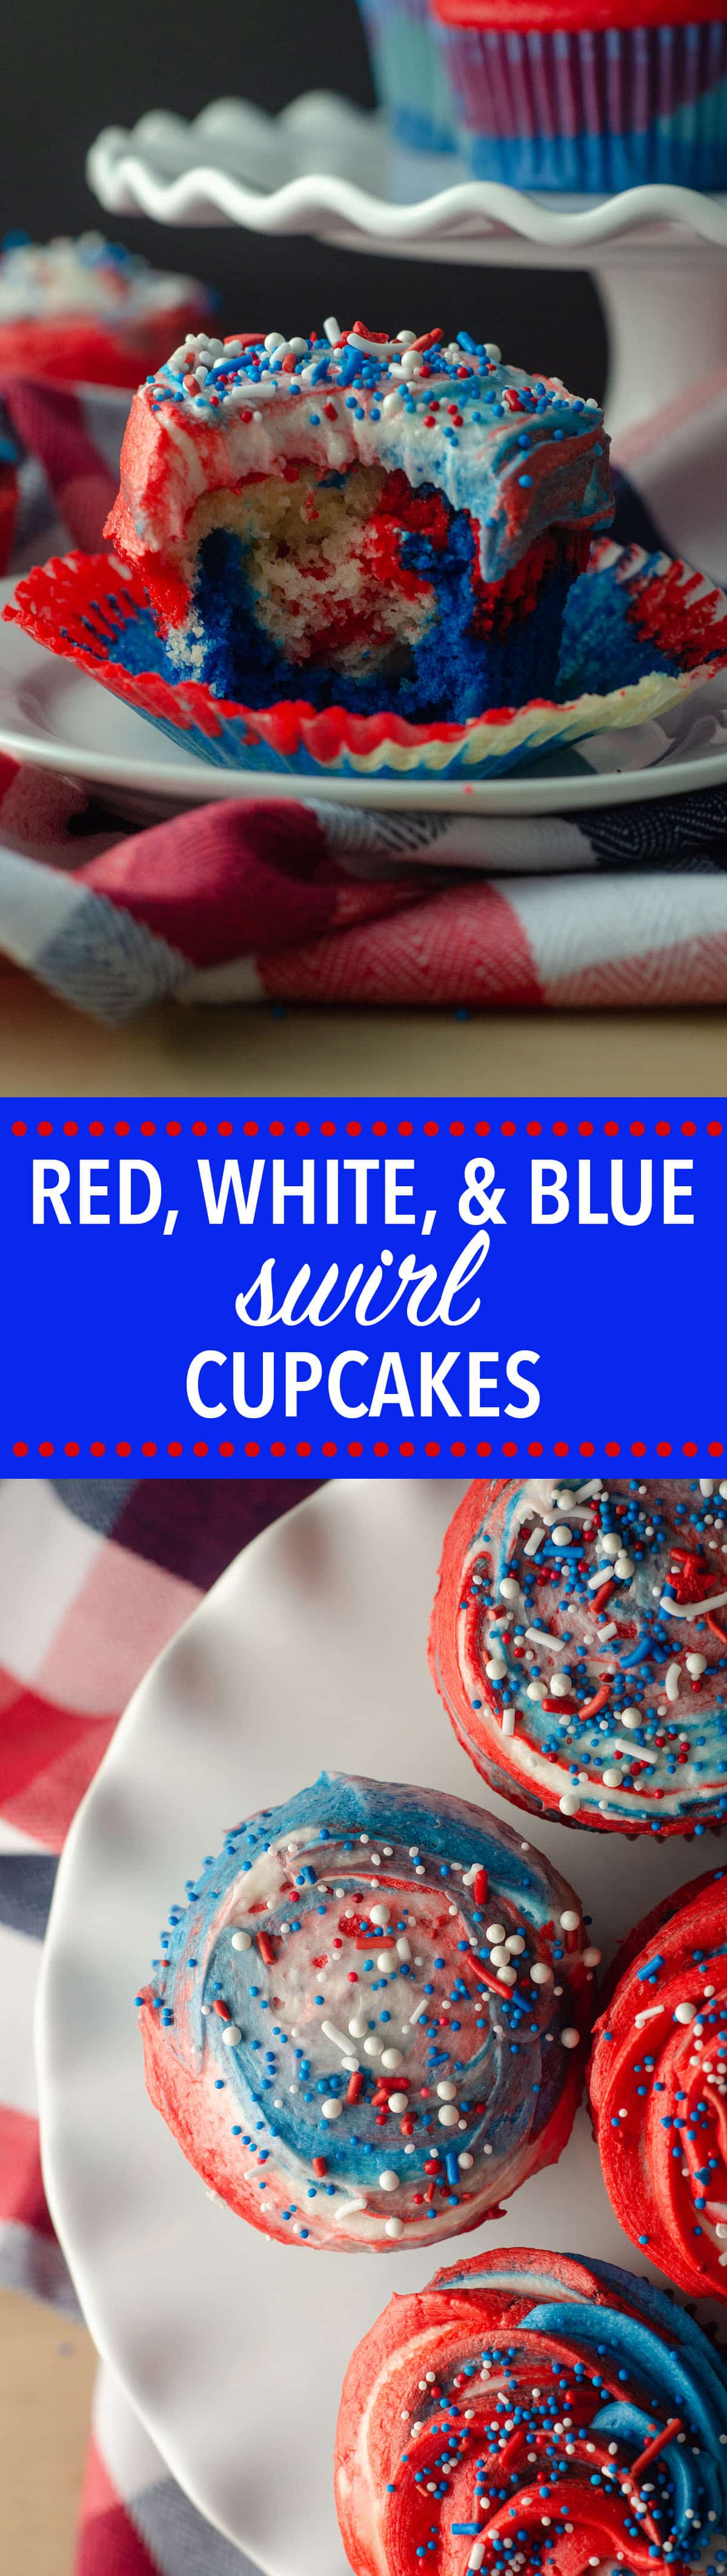 Red, White, & Blue Swirl Cupcakes: Beautifully swirled cupcakes that taste as great as they look! Perfect for any patriotic celebration or any time you want some American pride in your dessert. via @frshaprilflours